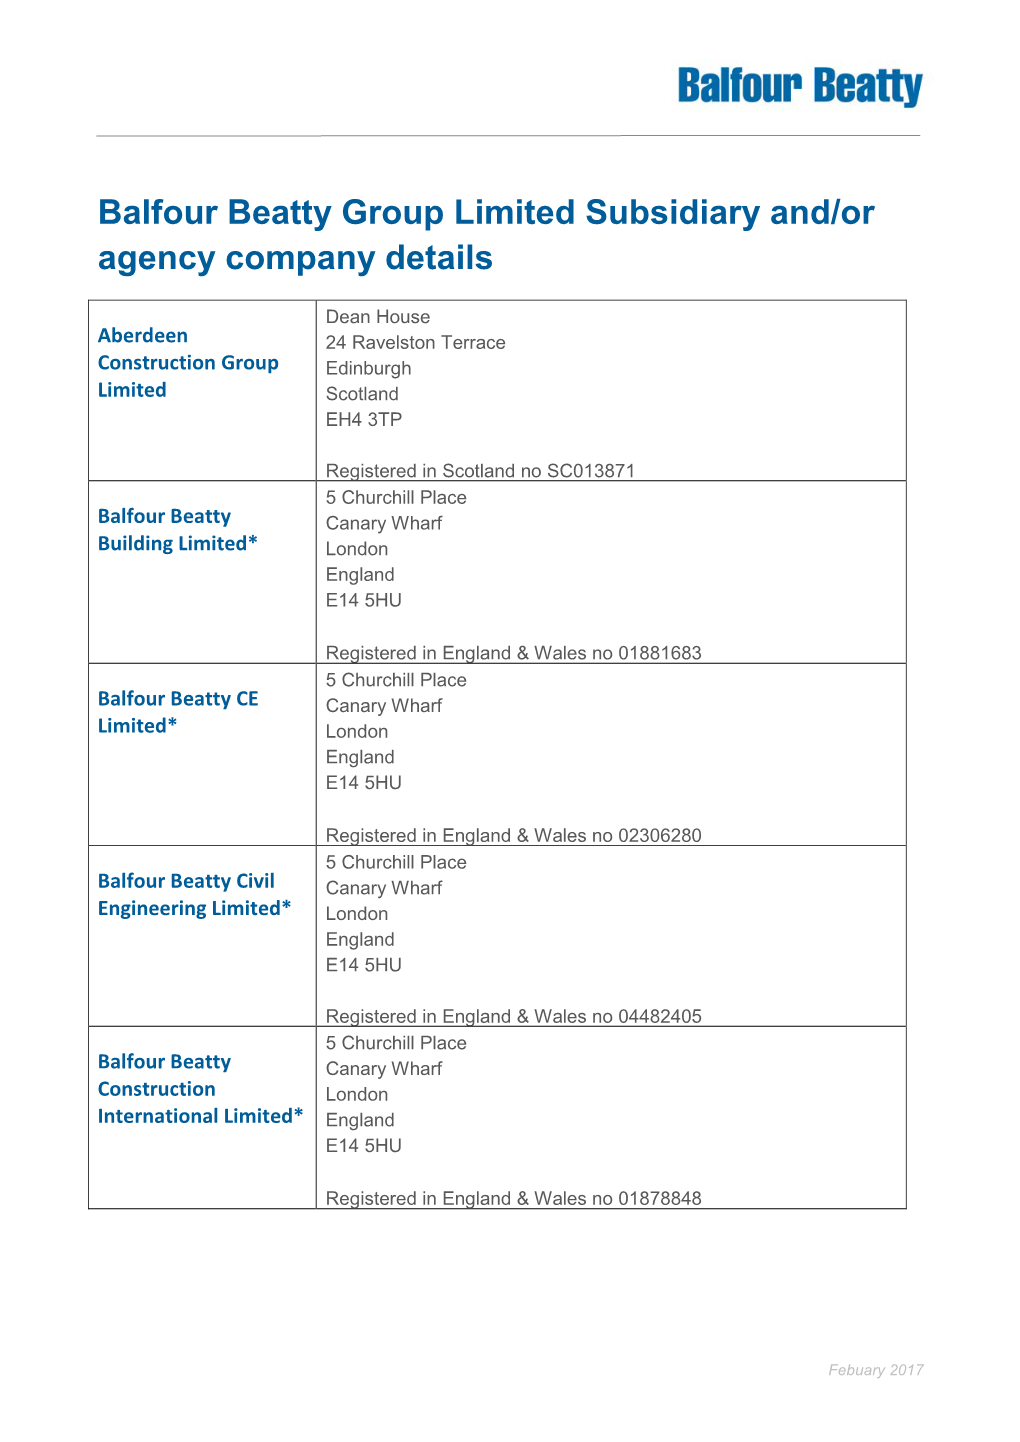 Balfour Beatty Group Limited Subsidiary And/Or Agency Company Details